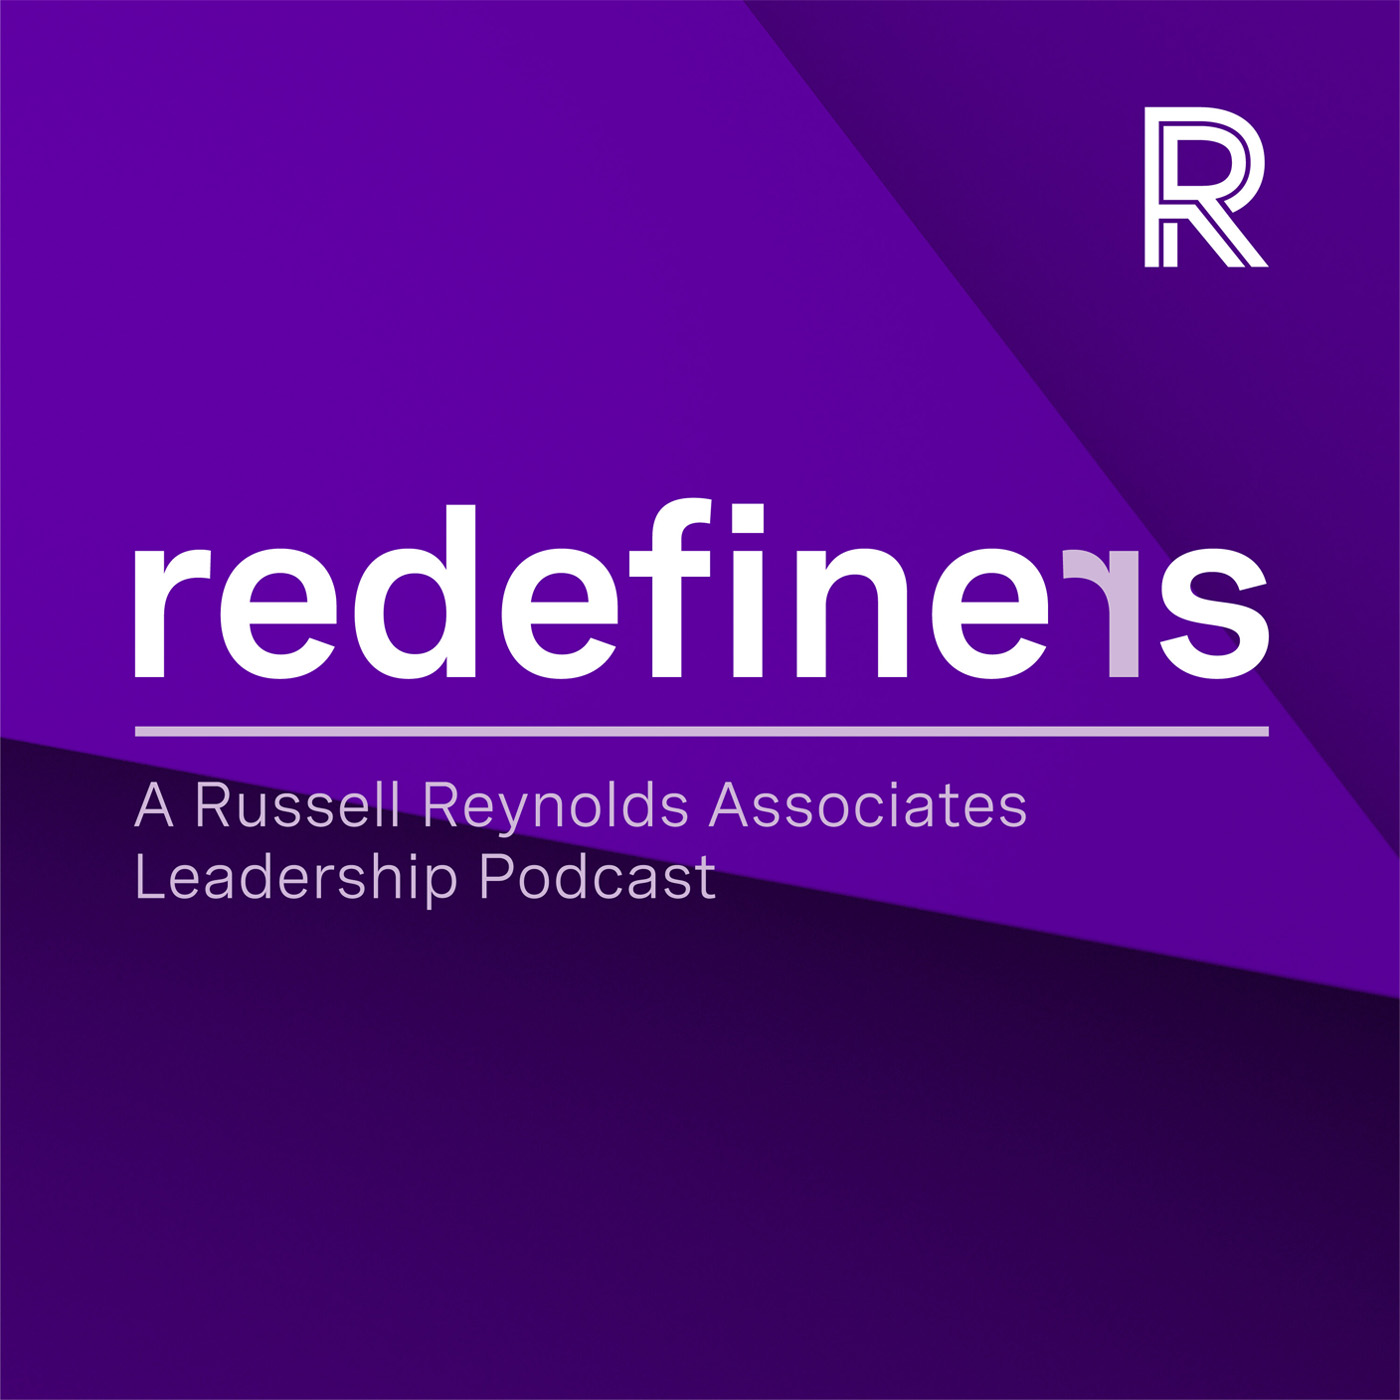 Redefiners Podcast logo poster